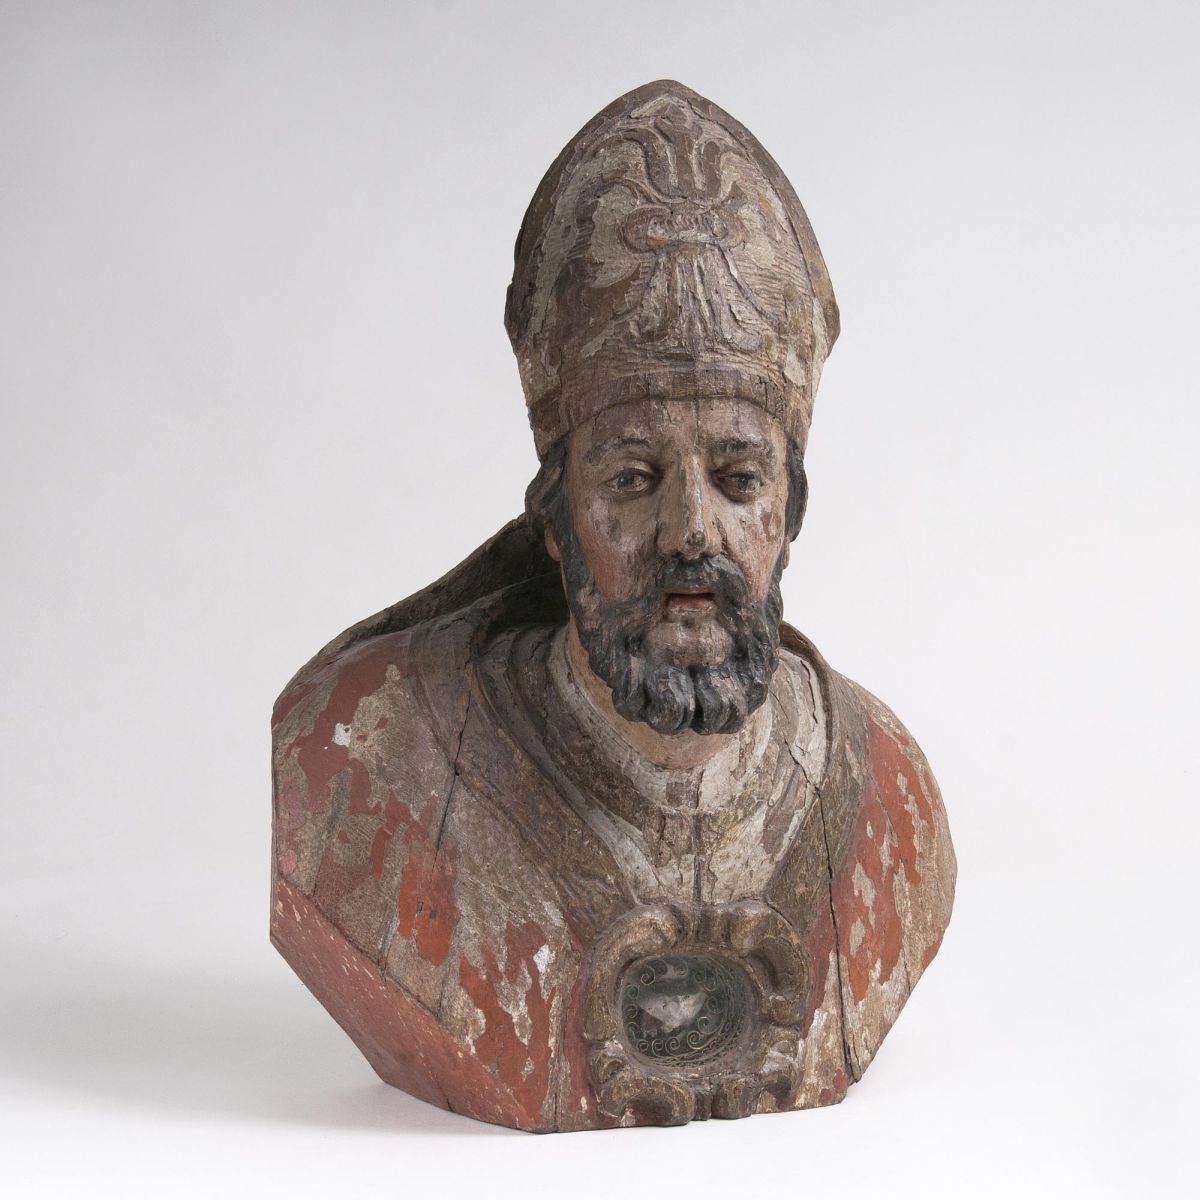 A Baroque Reliquary Bust of a Bishop